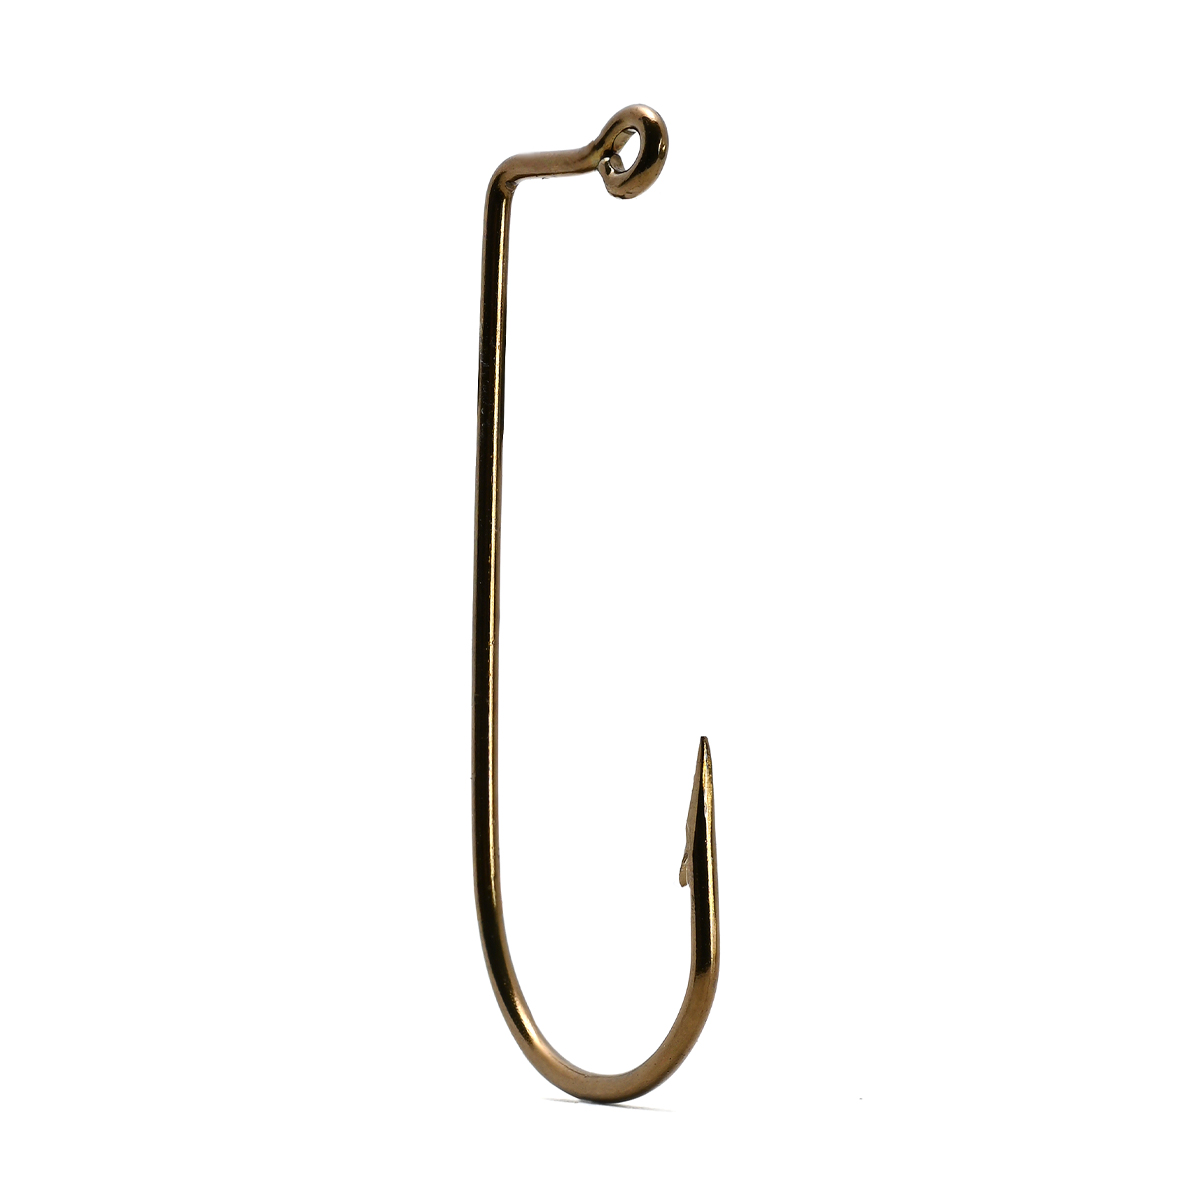 -570--#4/0  BRONZE JIG HOOK EAGLE CLAW 100 PCS PER PACKAGE 